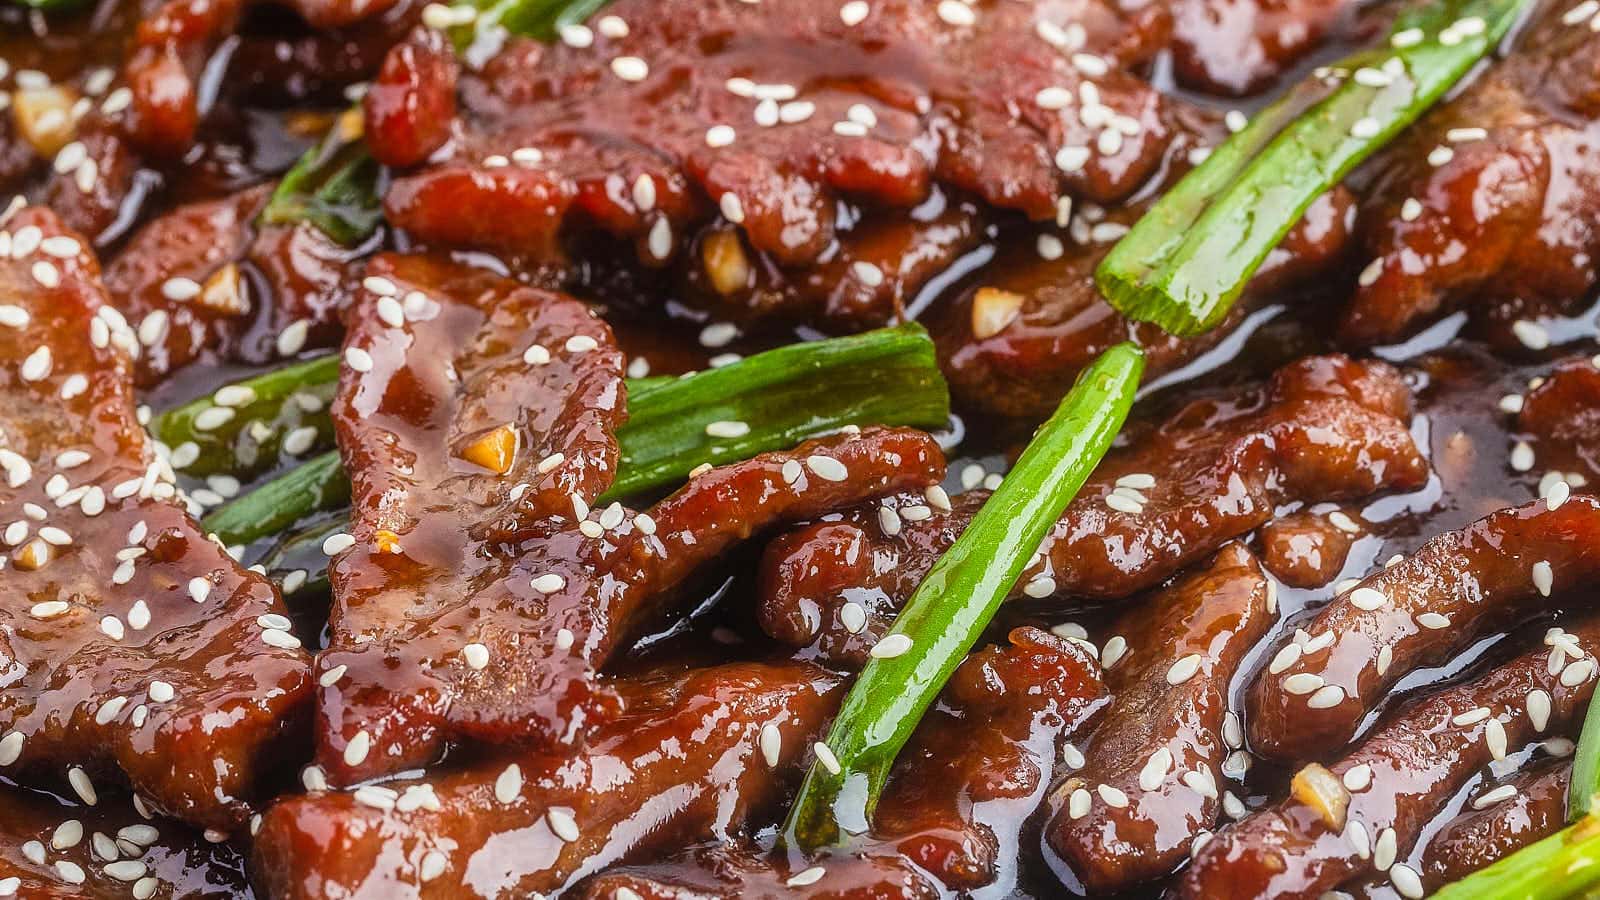 Mongolian Beef recipe by Cheerful Cook.